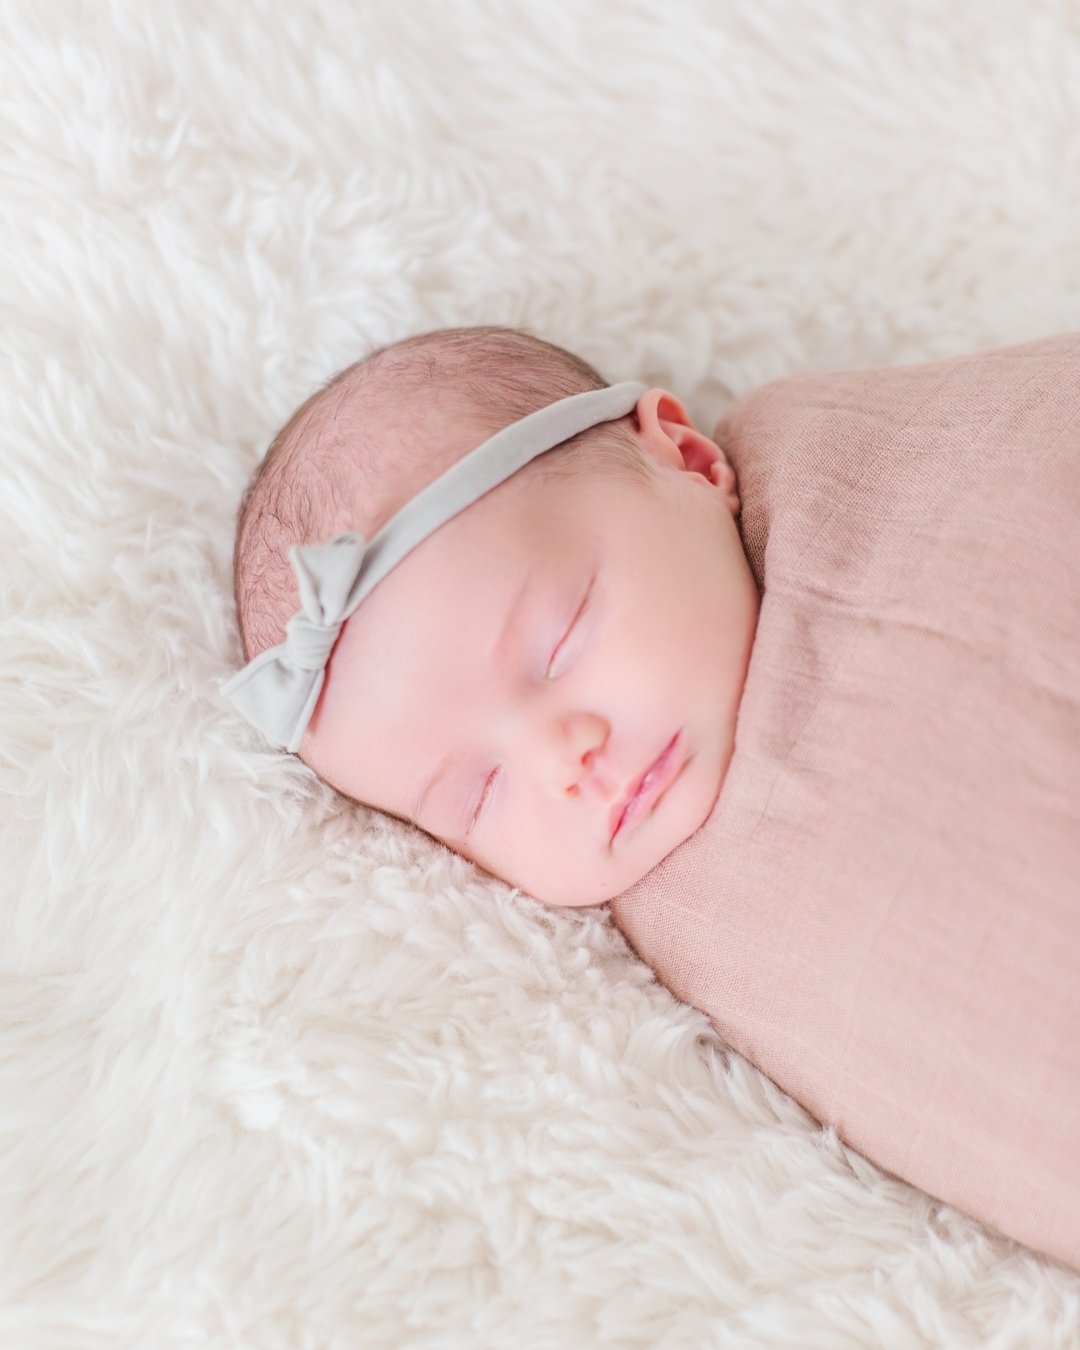 Sweet little bows and soft neutral swaddles make for the most sleepy little newborn session. 
.
These photos from Phoebe's newborn session never get old. I can't wait to capture this sweet family again this week for my first May Mini Session! 
.
Don'